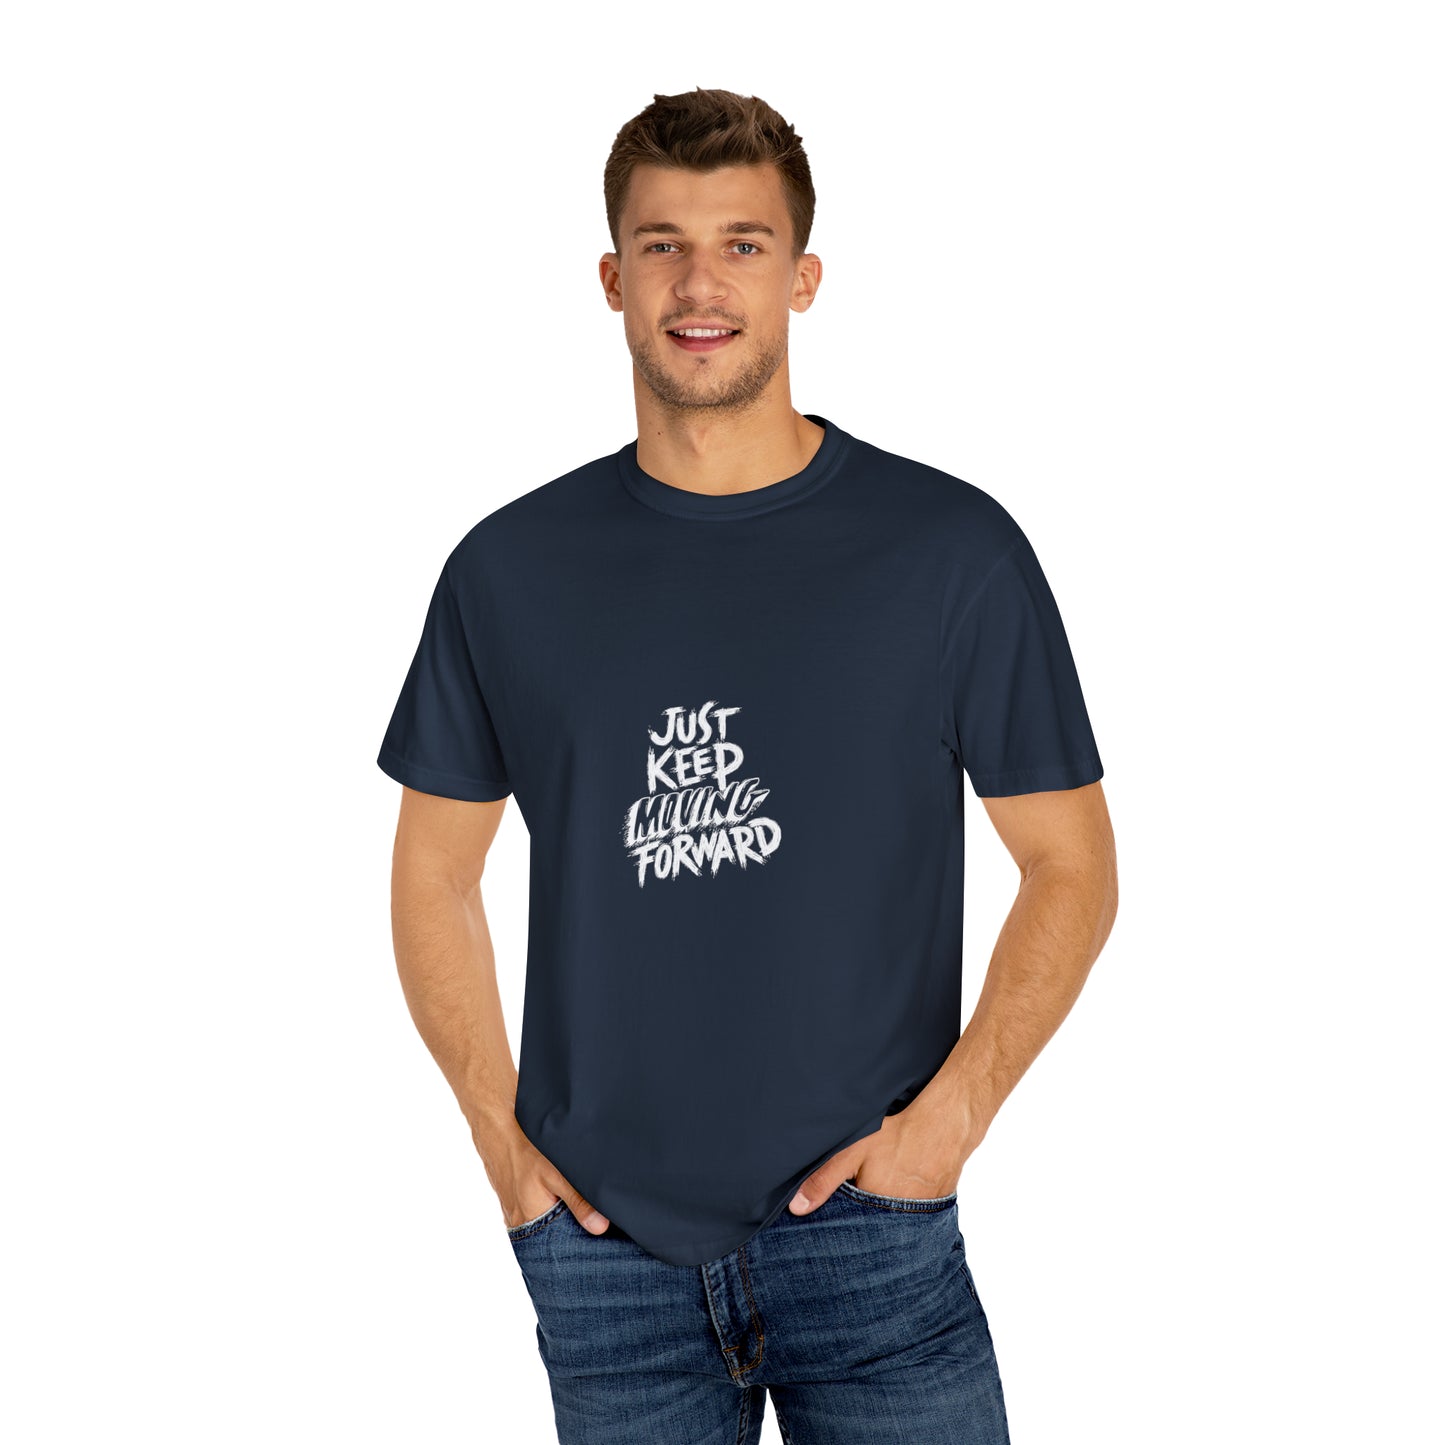 JUST Keep Moving Forward - Unisex Garment-Dyed T-shirt